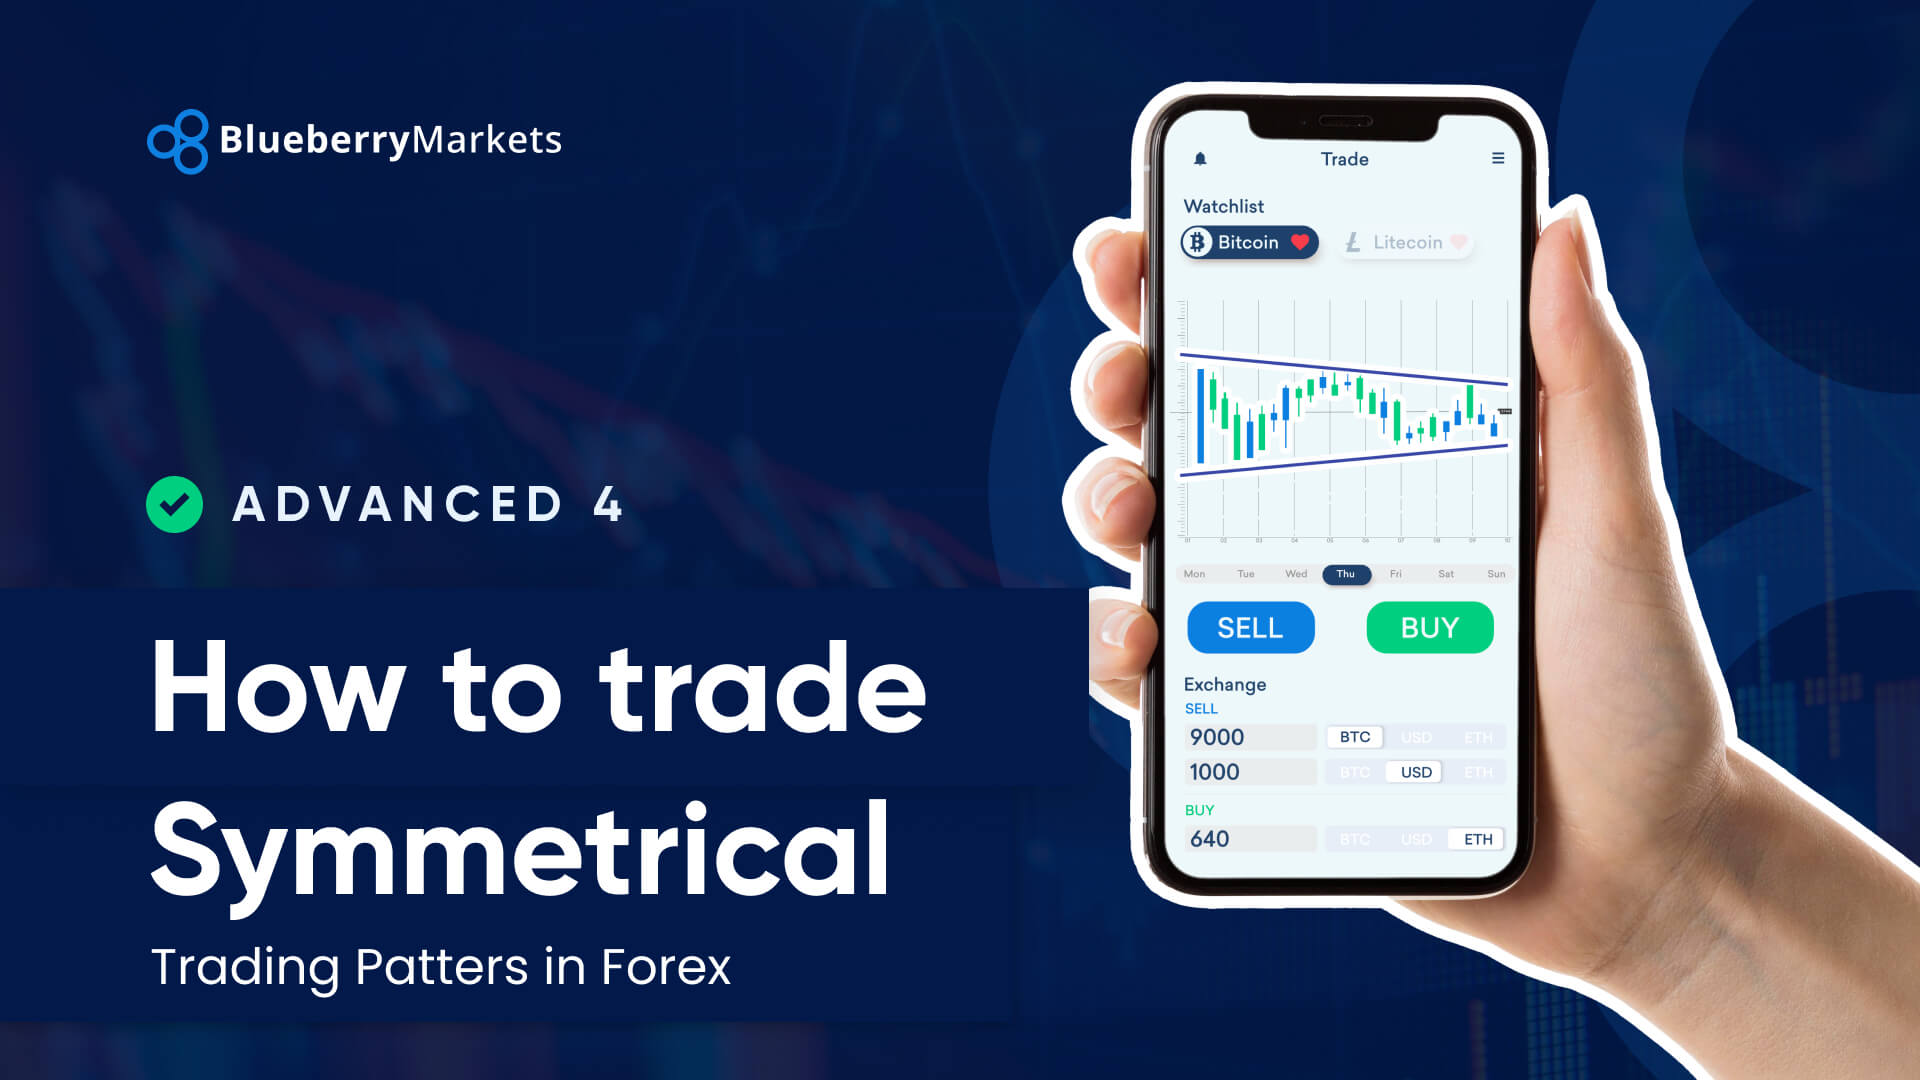 How to Trade Symmetrical Trading Patterns in Forex